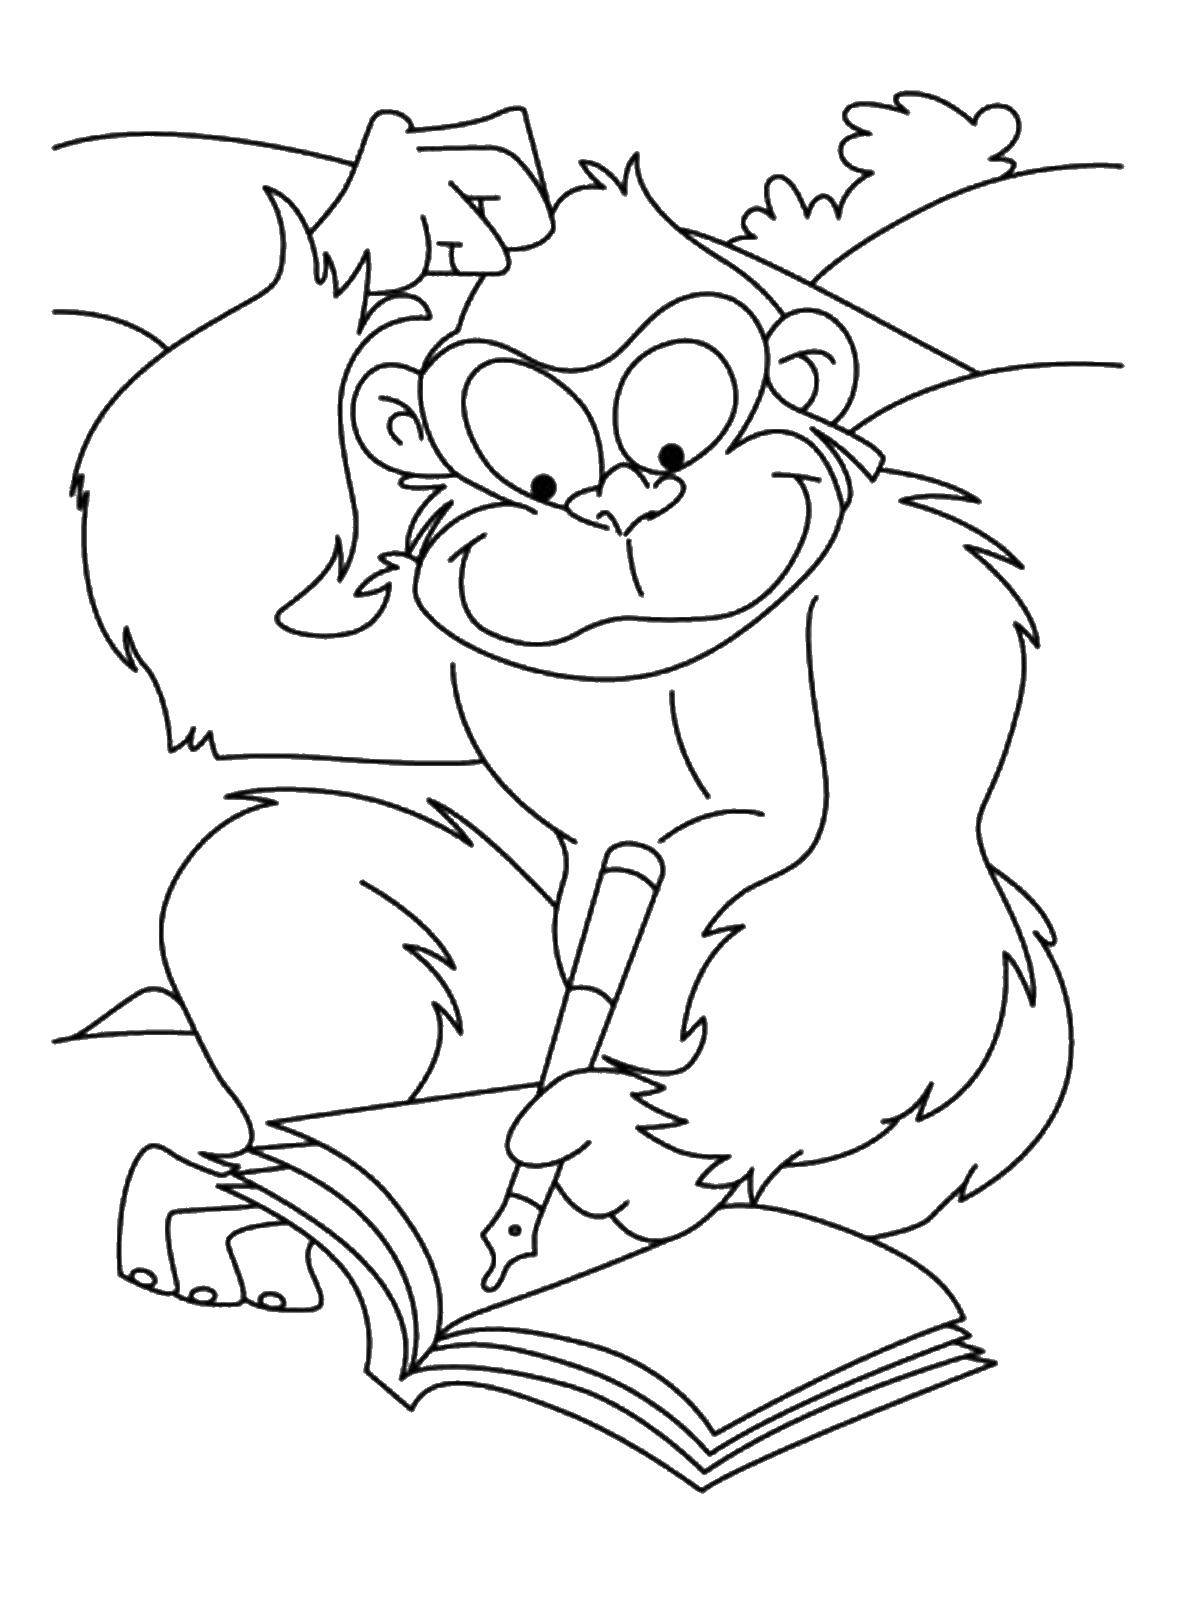 Coloring The monkey writes. Category school. Tags:  School, class, lesson, children.